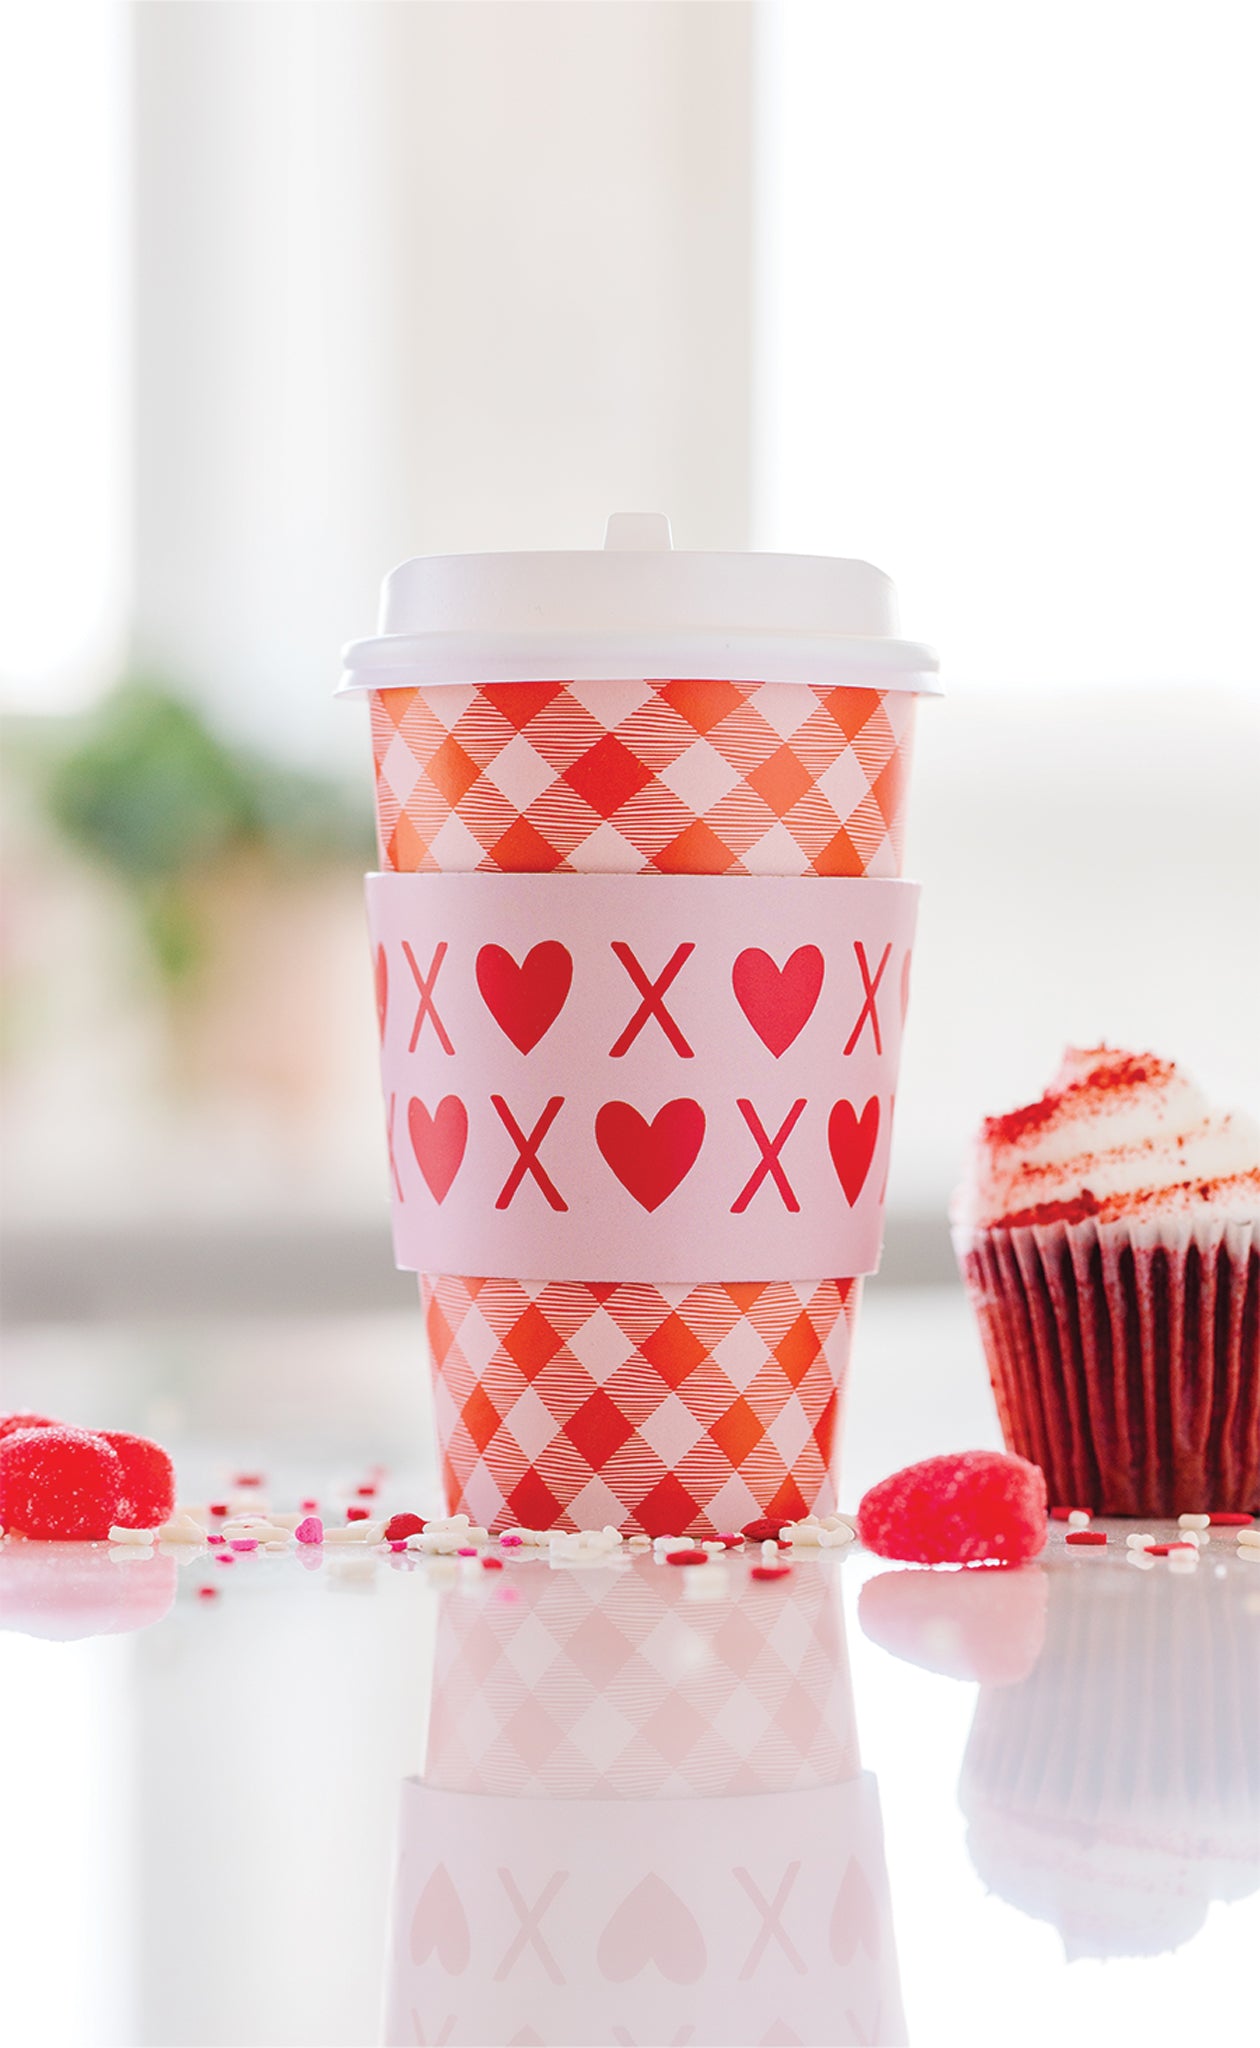 Red and Pink Gingham To Go Cups